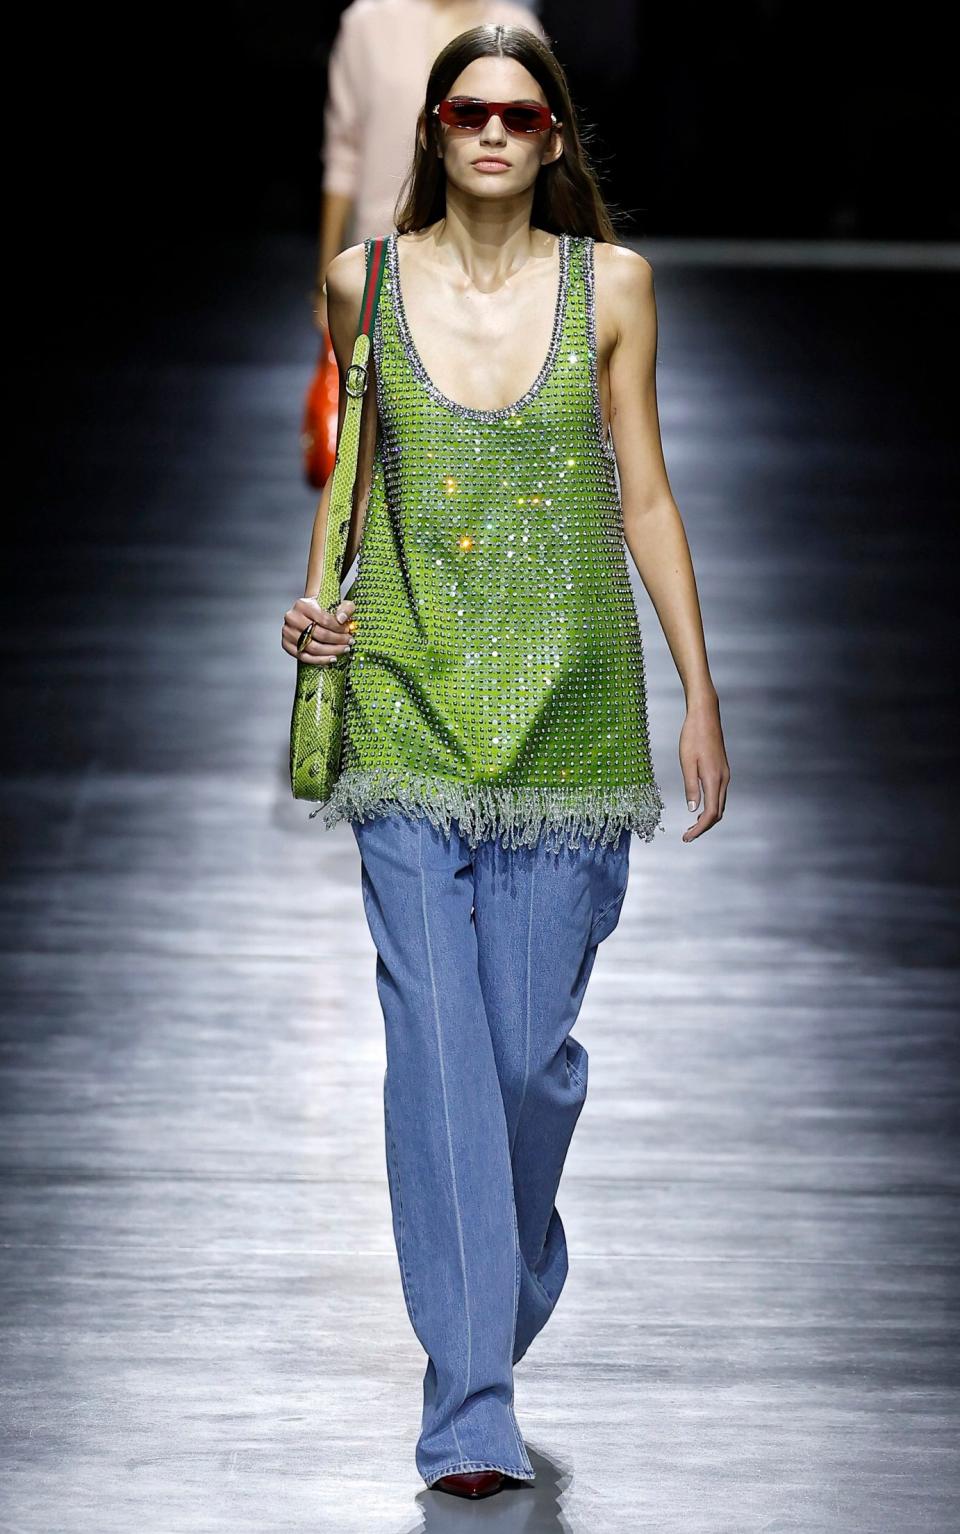 A Gucci model walks during the Milan Fashion Week in Spring 2023